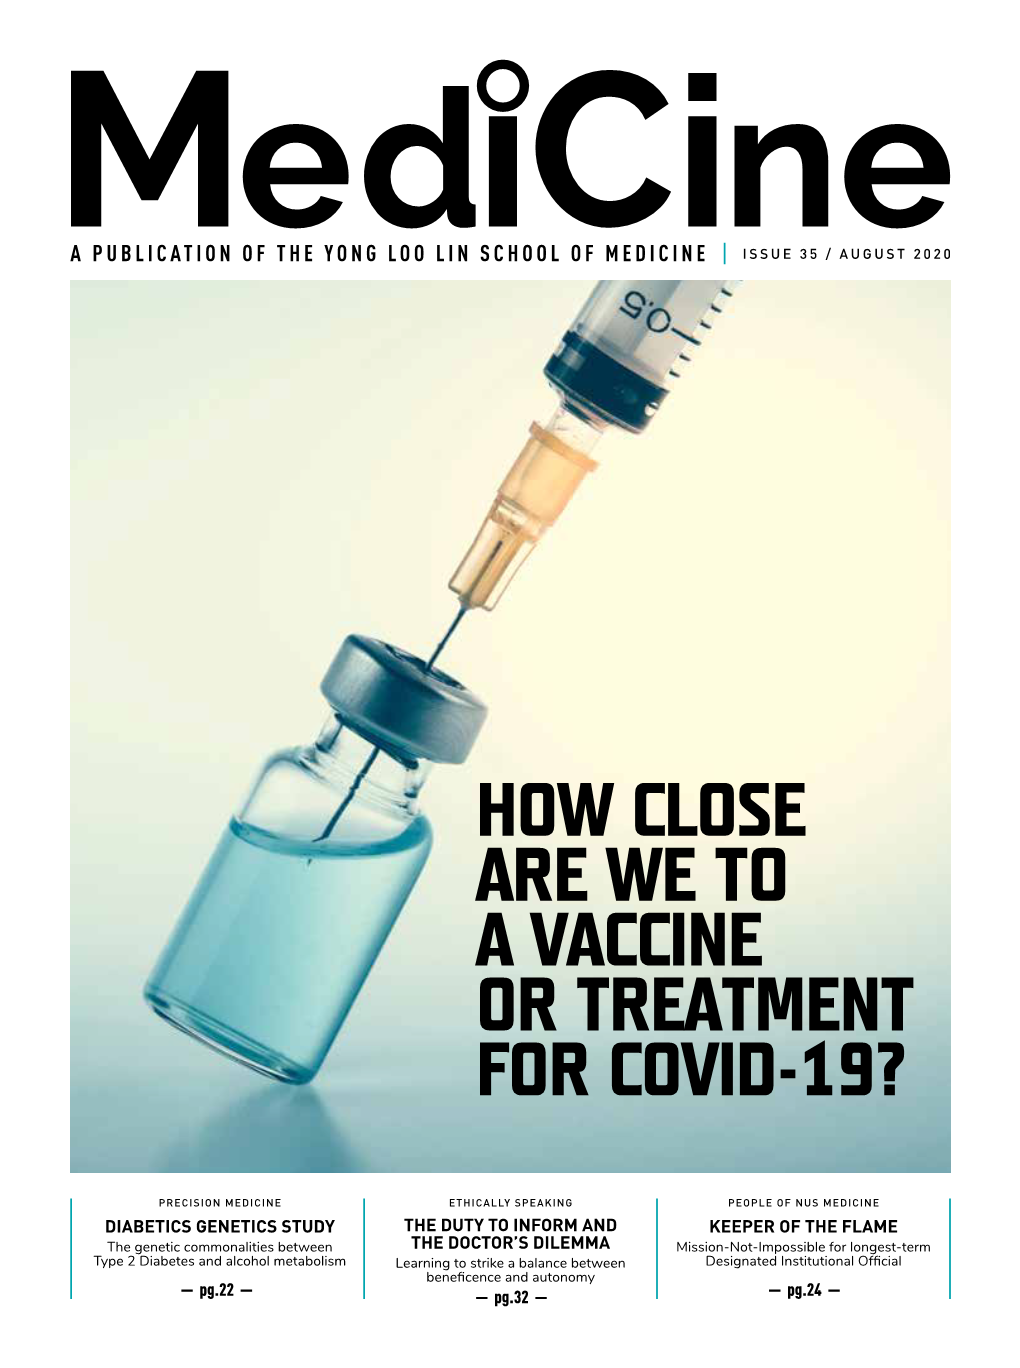 How Close Are We to a Vaccine Or Treatment for Covid-19?